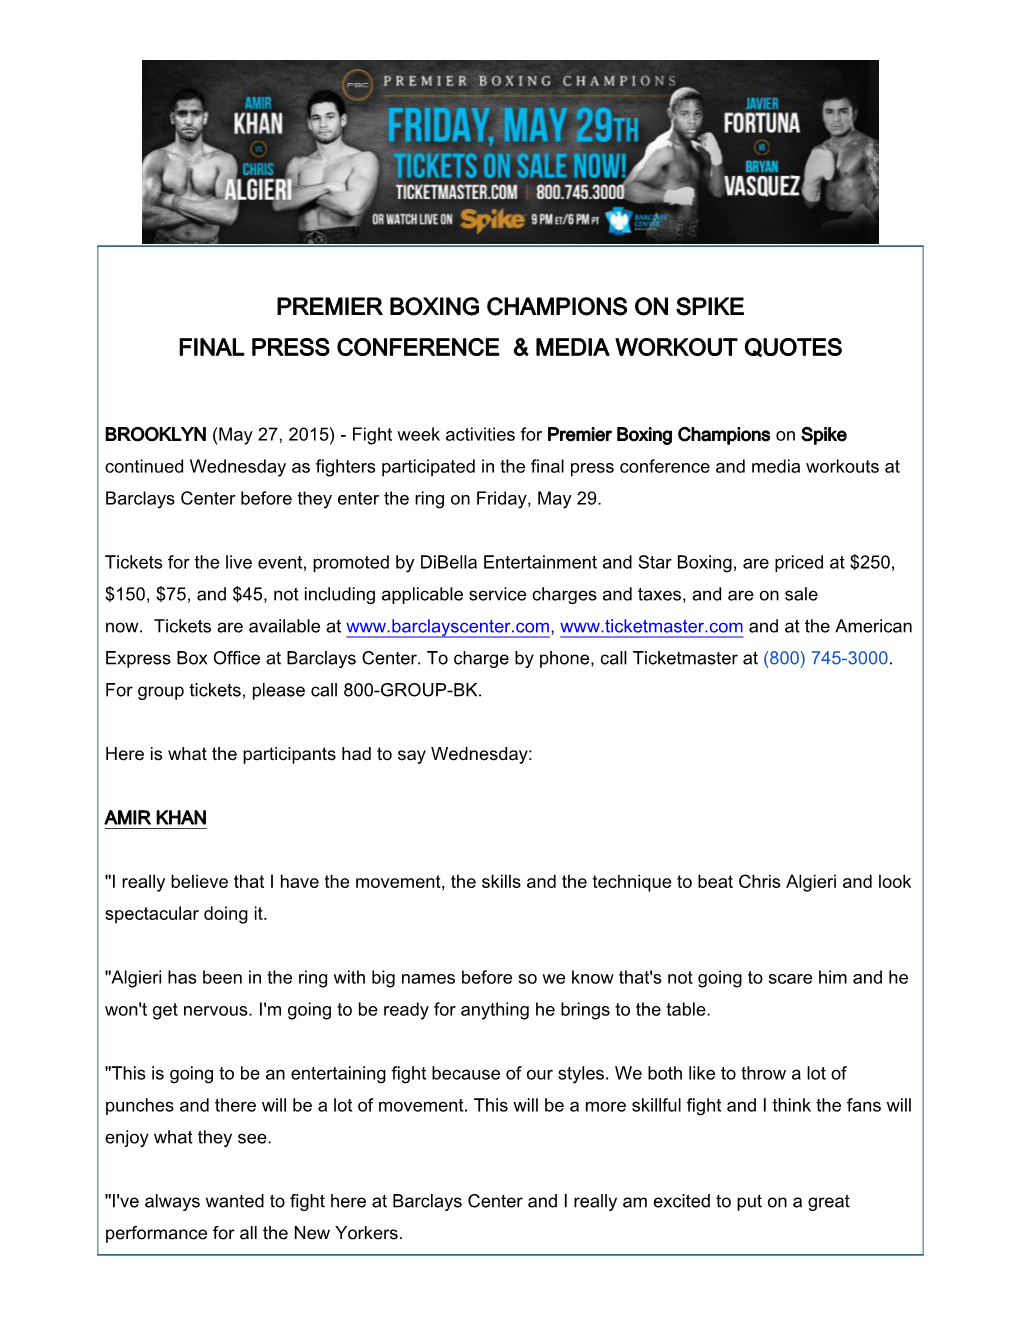 Premier Boxing Champions on Spike Final Press Conference & Media Workout Quotes